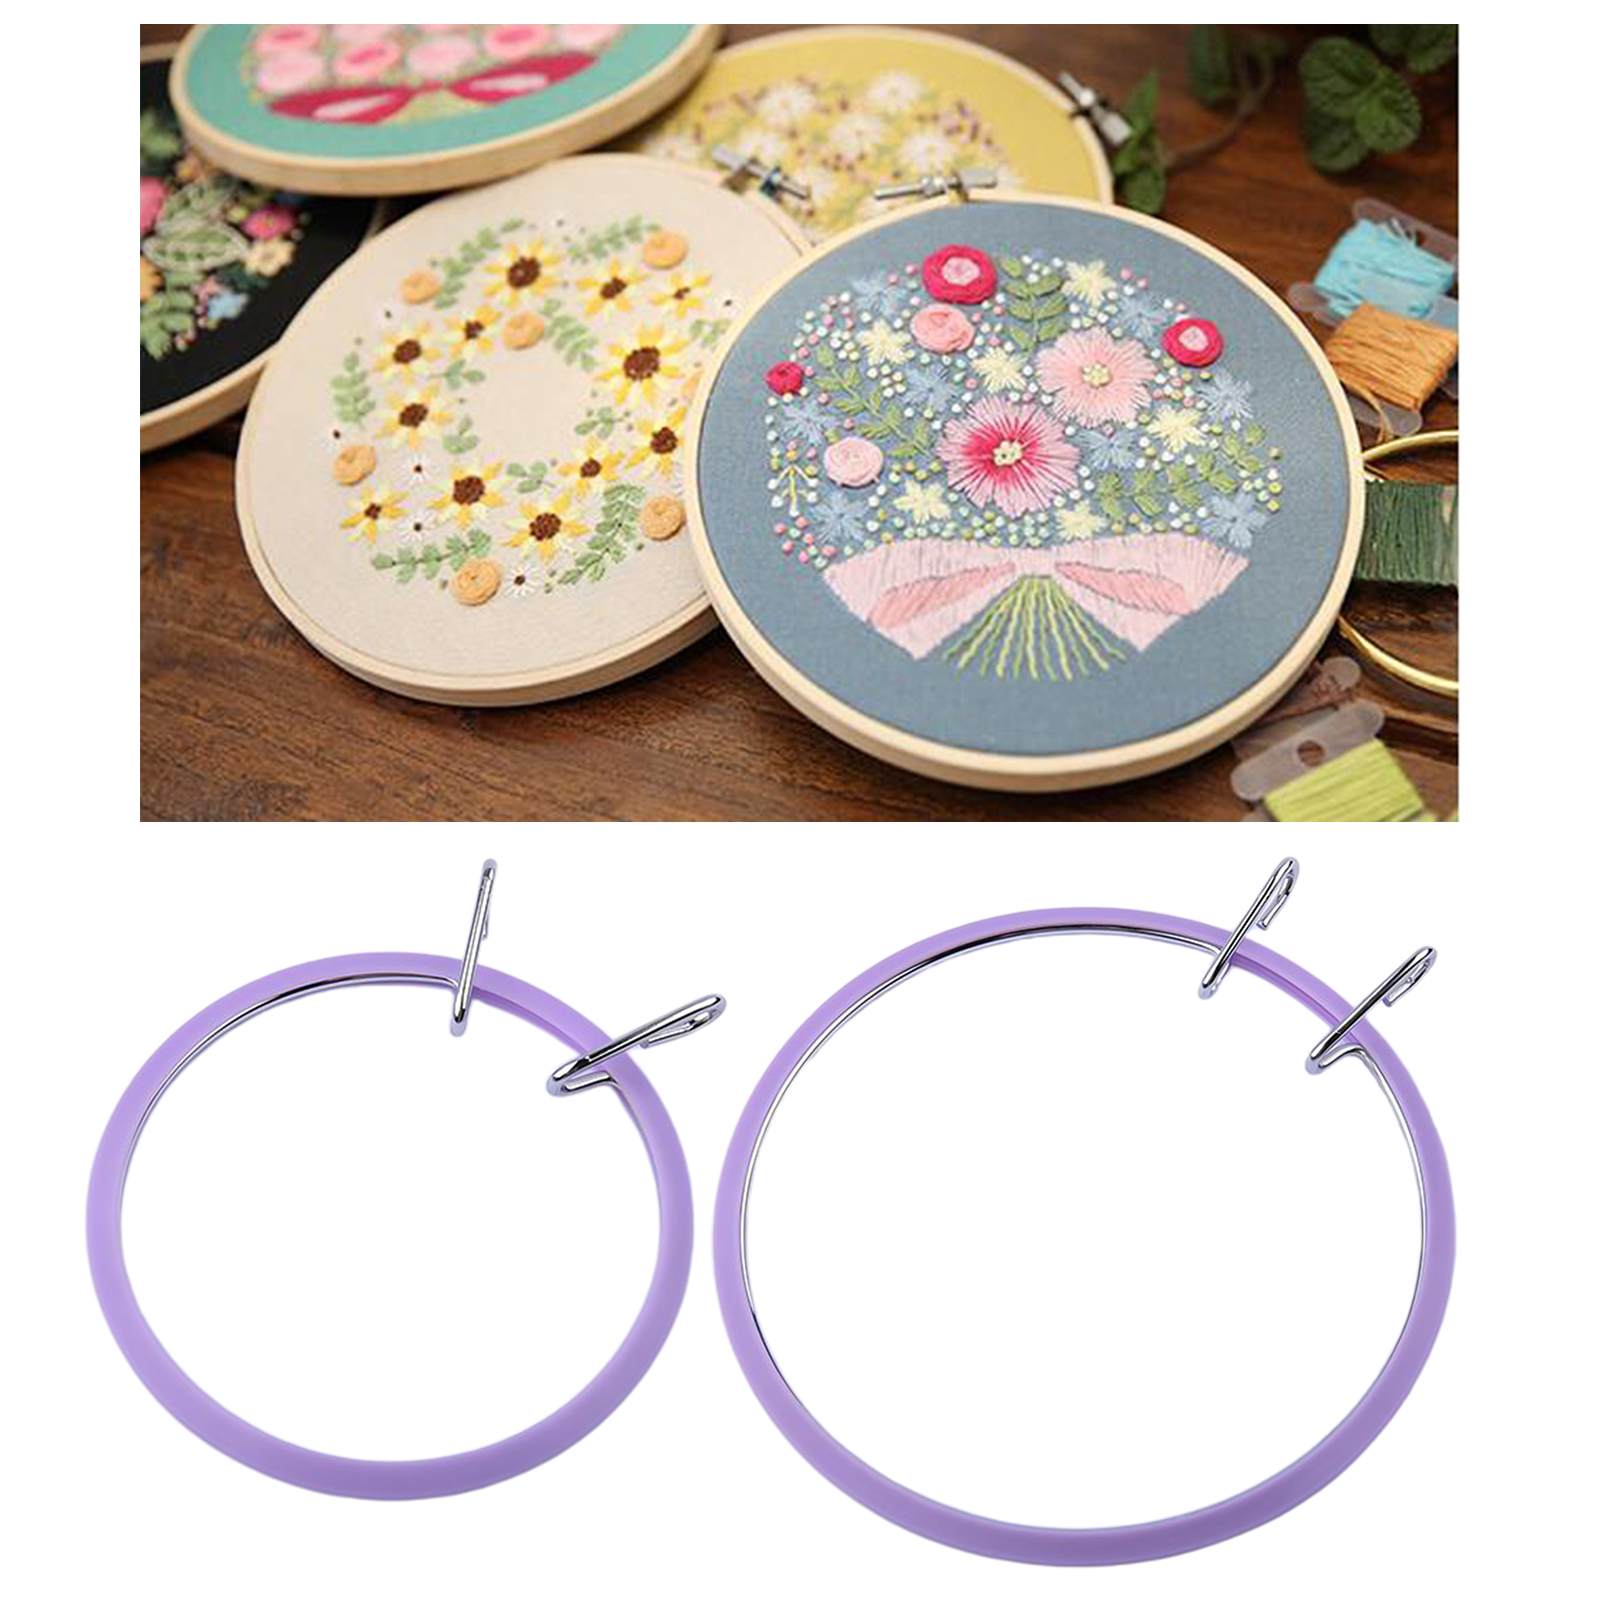 Spring Tension Embroidery Hoop Tool Manual Accessories Embroidery Frame Circle Art Craft Cross Stitch Sewing Supplies